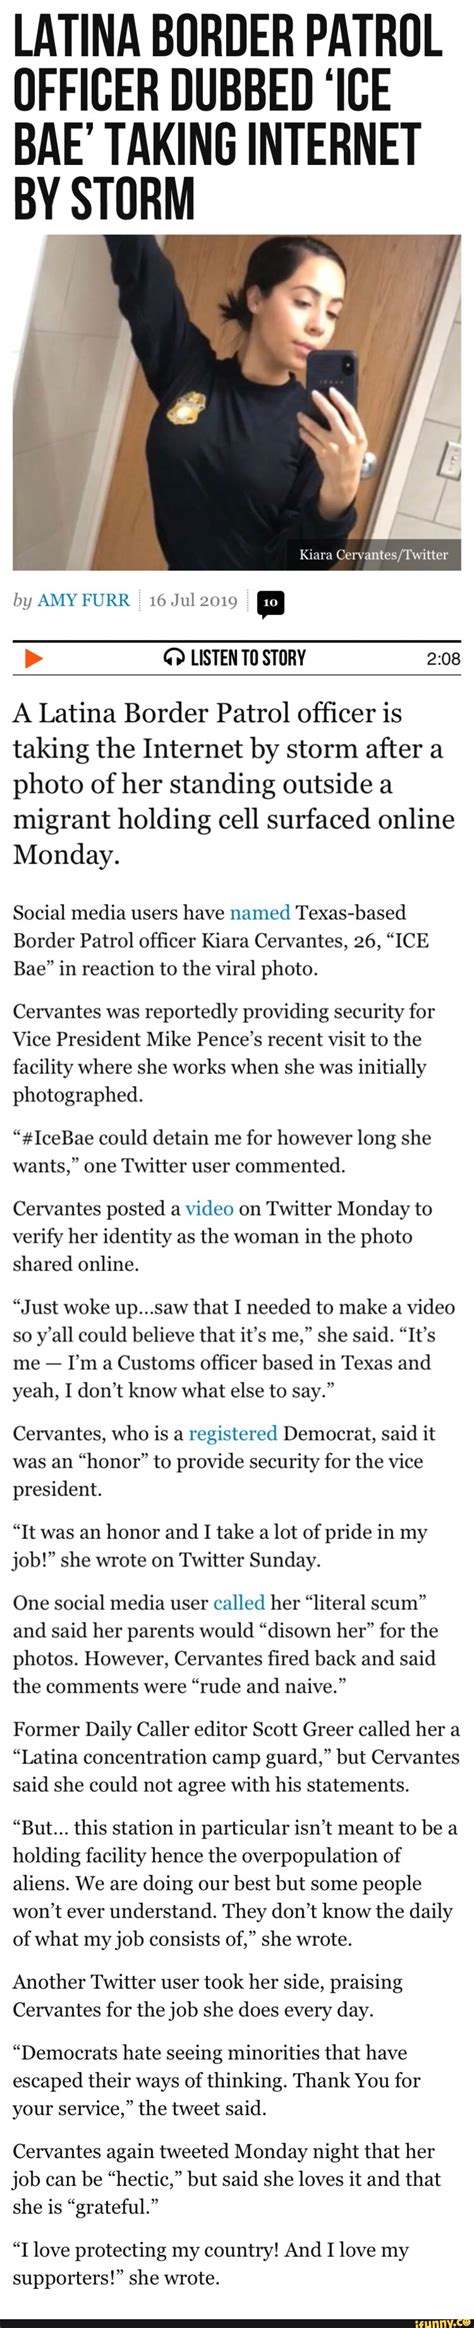 latina border patrol officer dubbed “ice bae taking internet by storm o listen t0 story 2 08